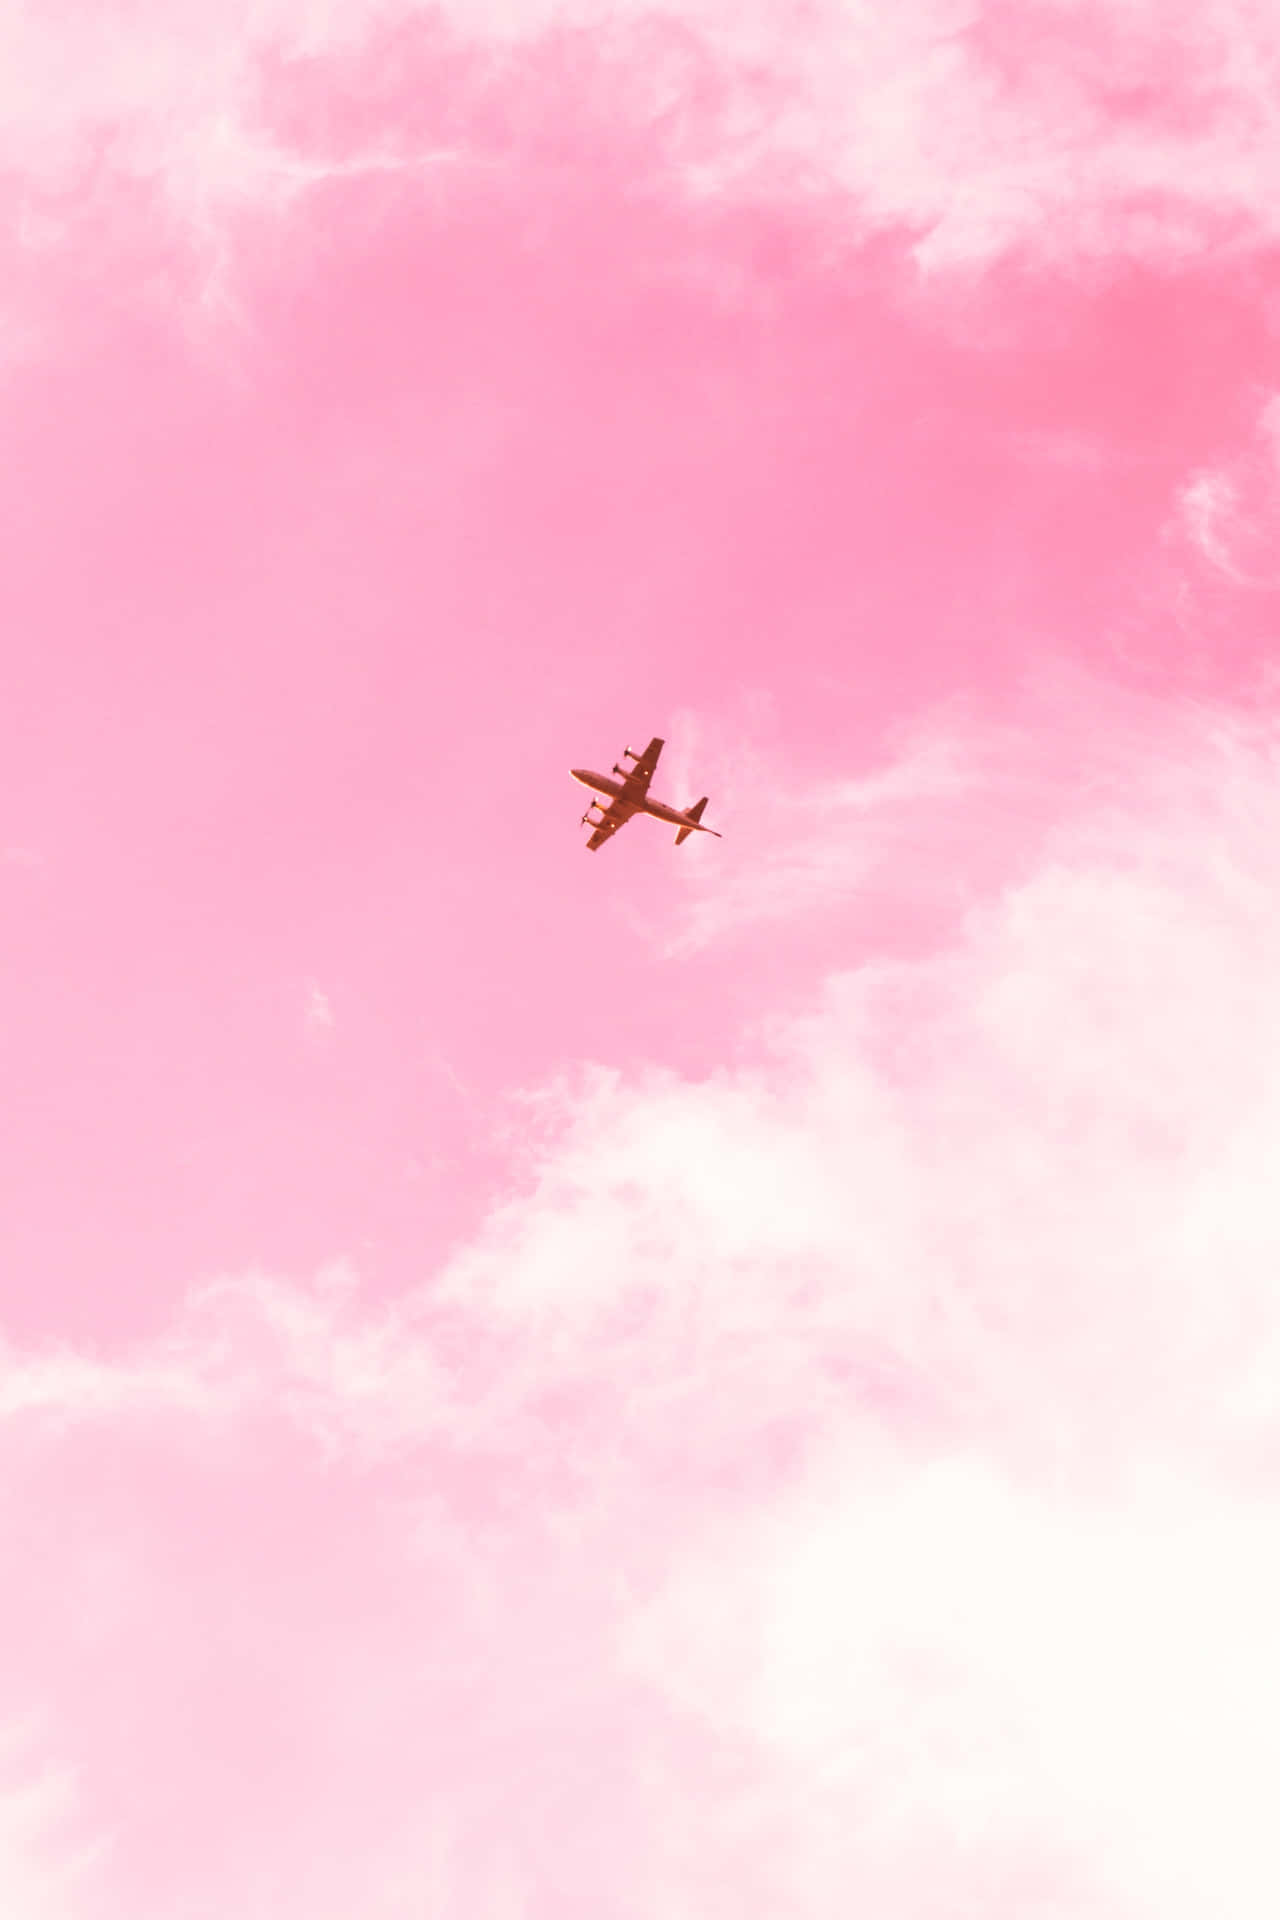 "Unlock the beauty of the sky with a stunning pink sky"